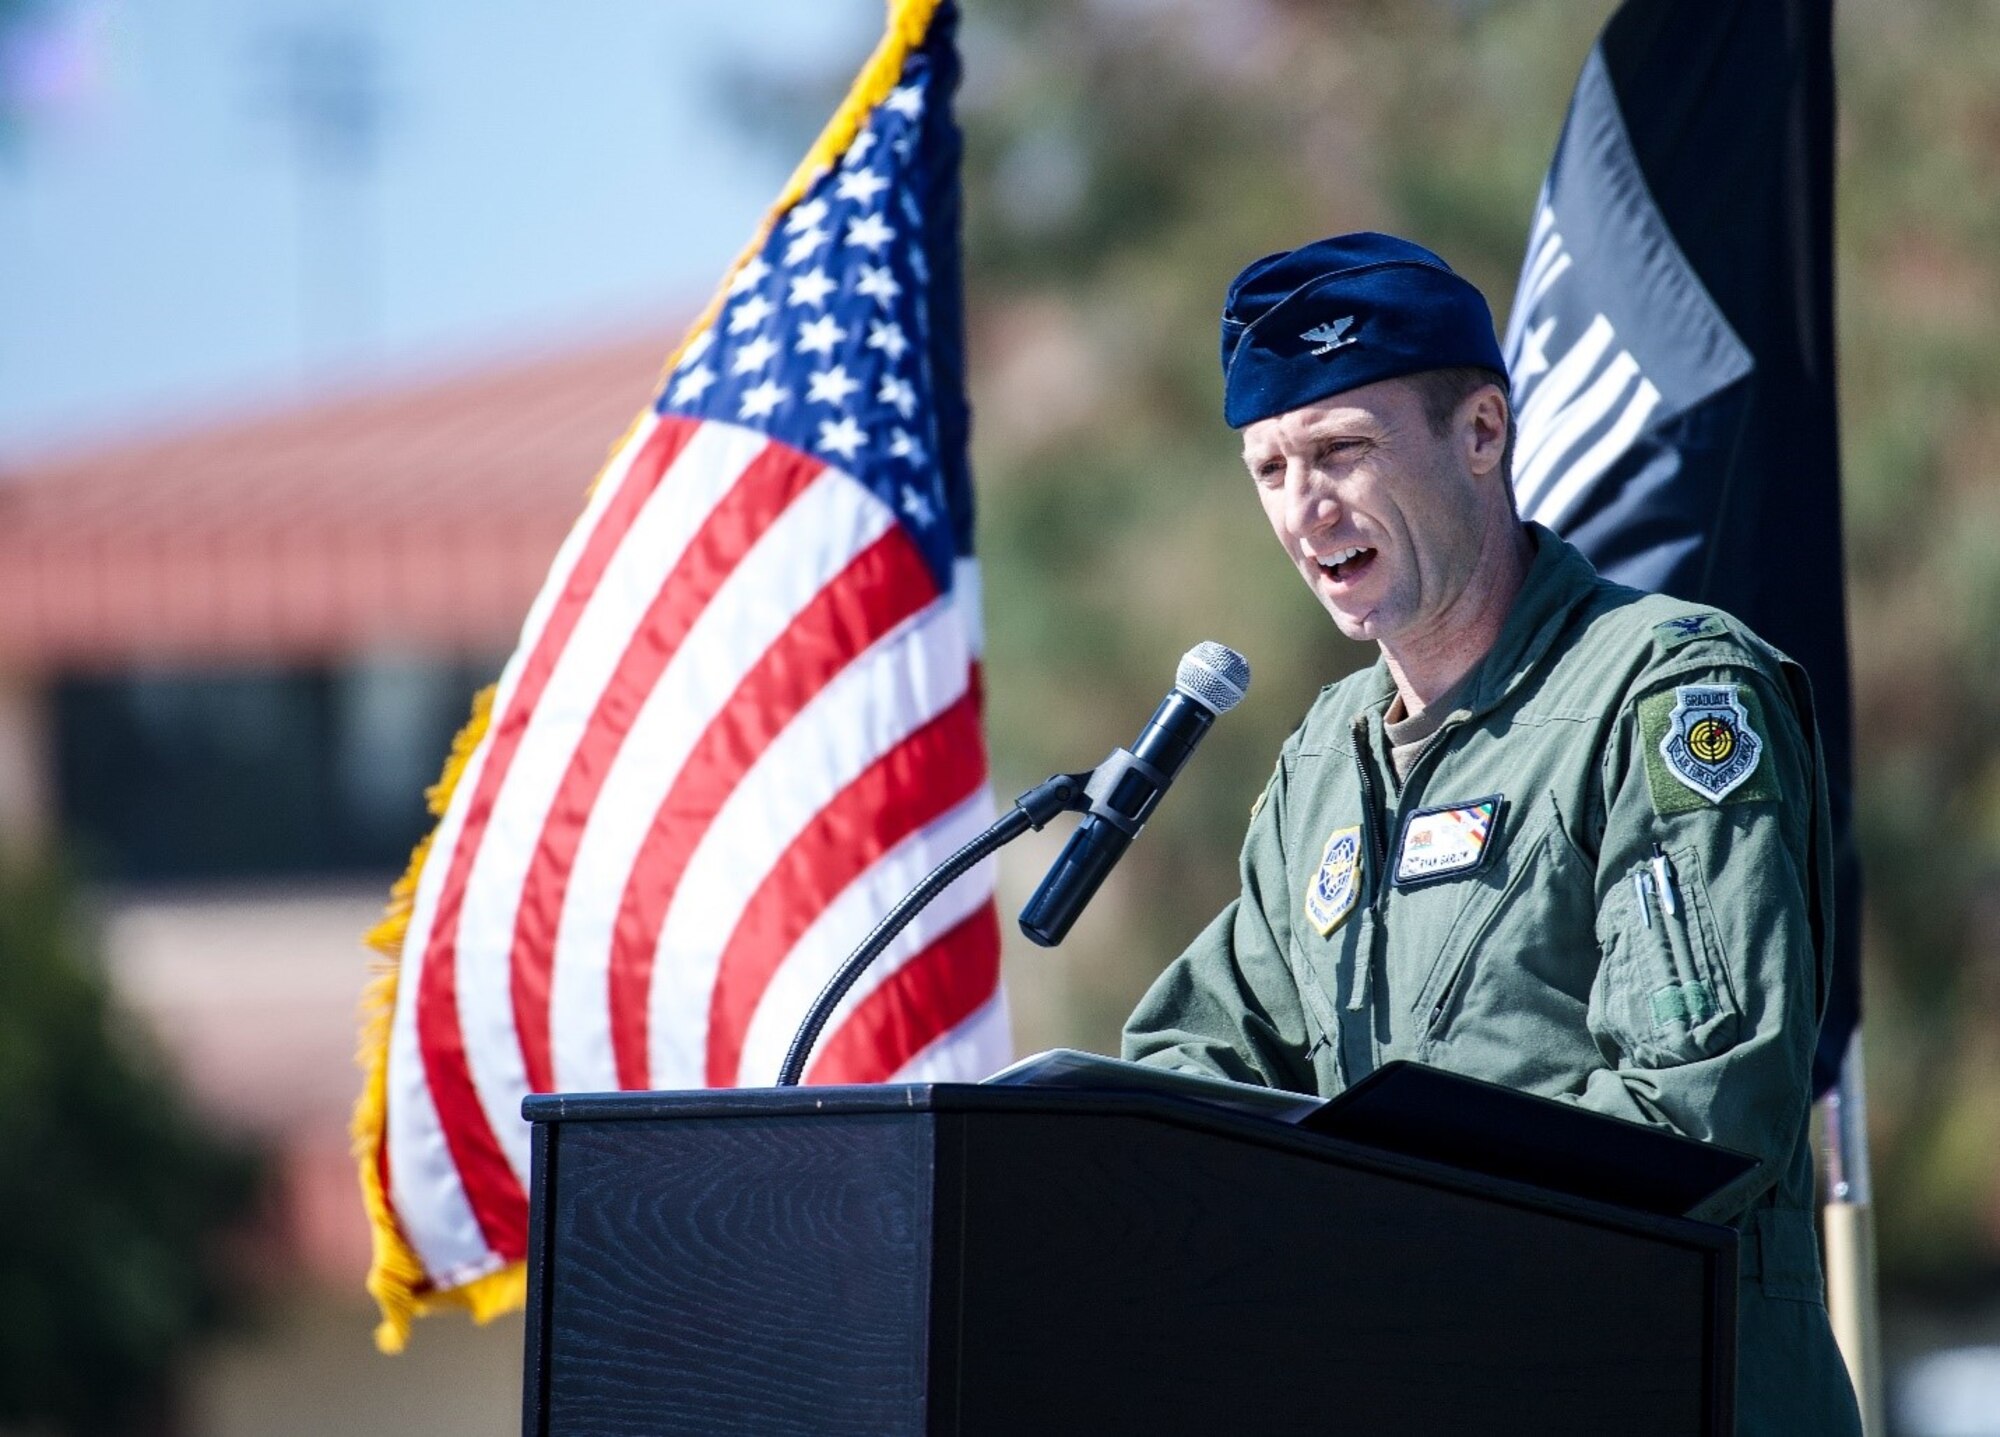 A uniformed Airman speaks into a microphone in front of the U.S. and POW/MIA flags